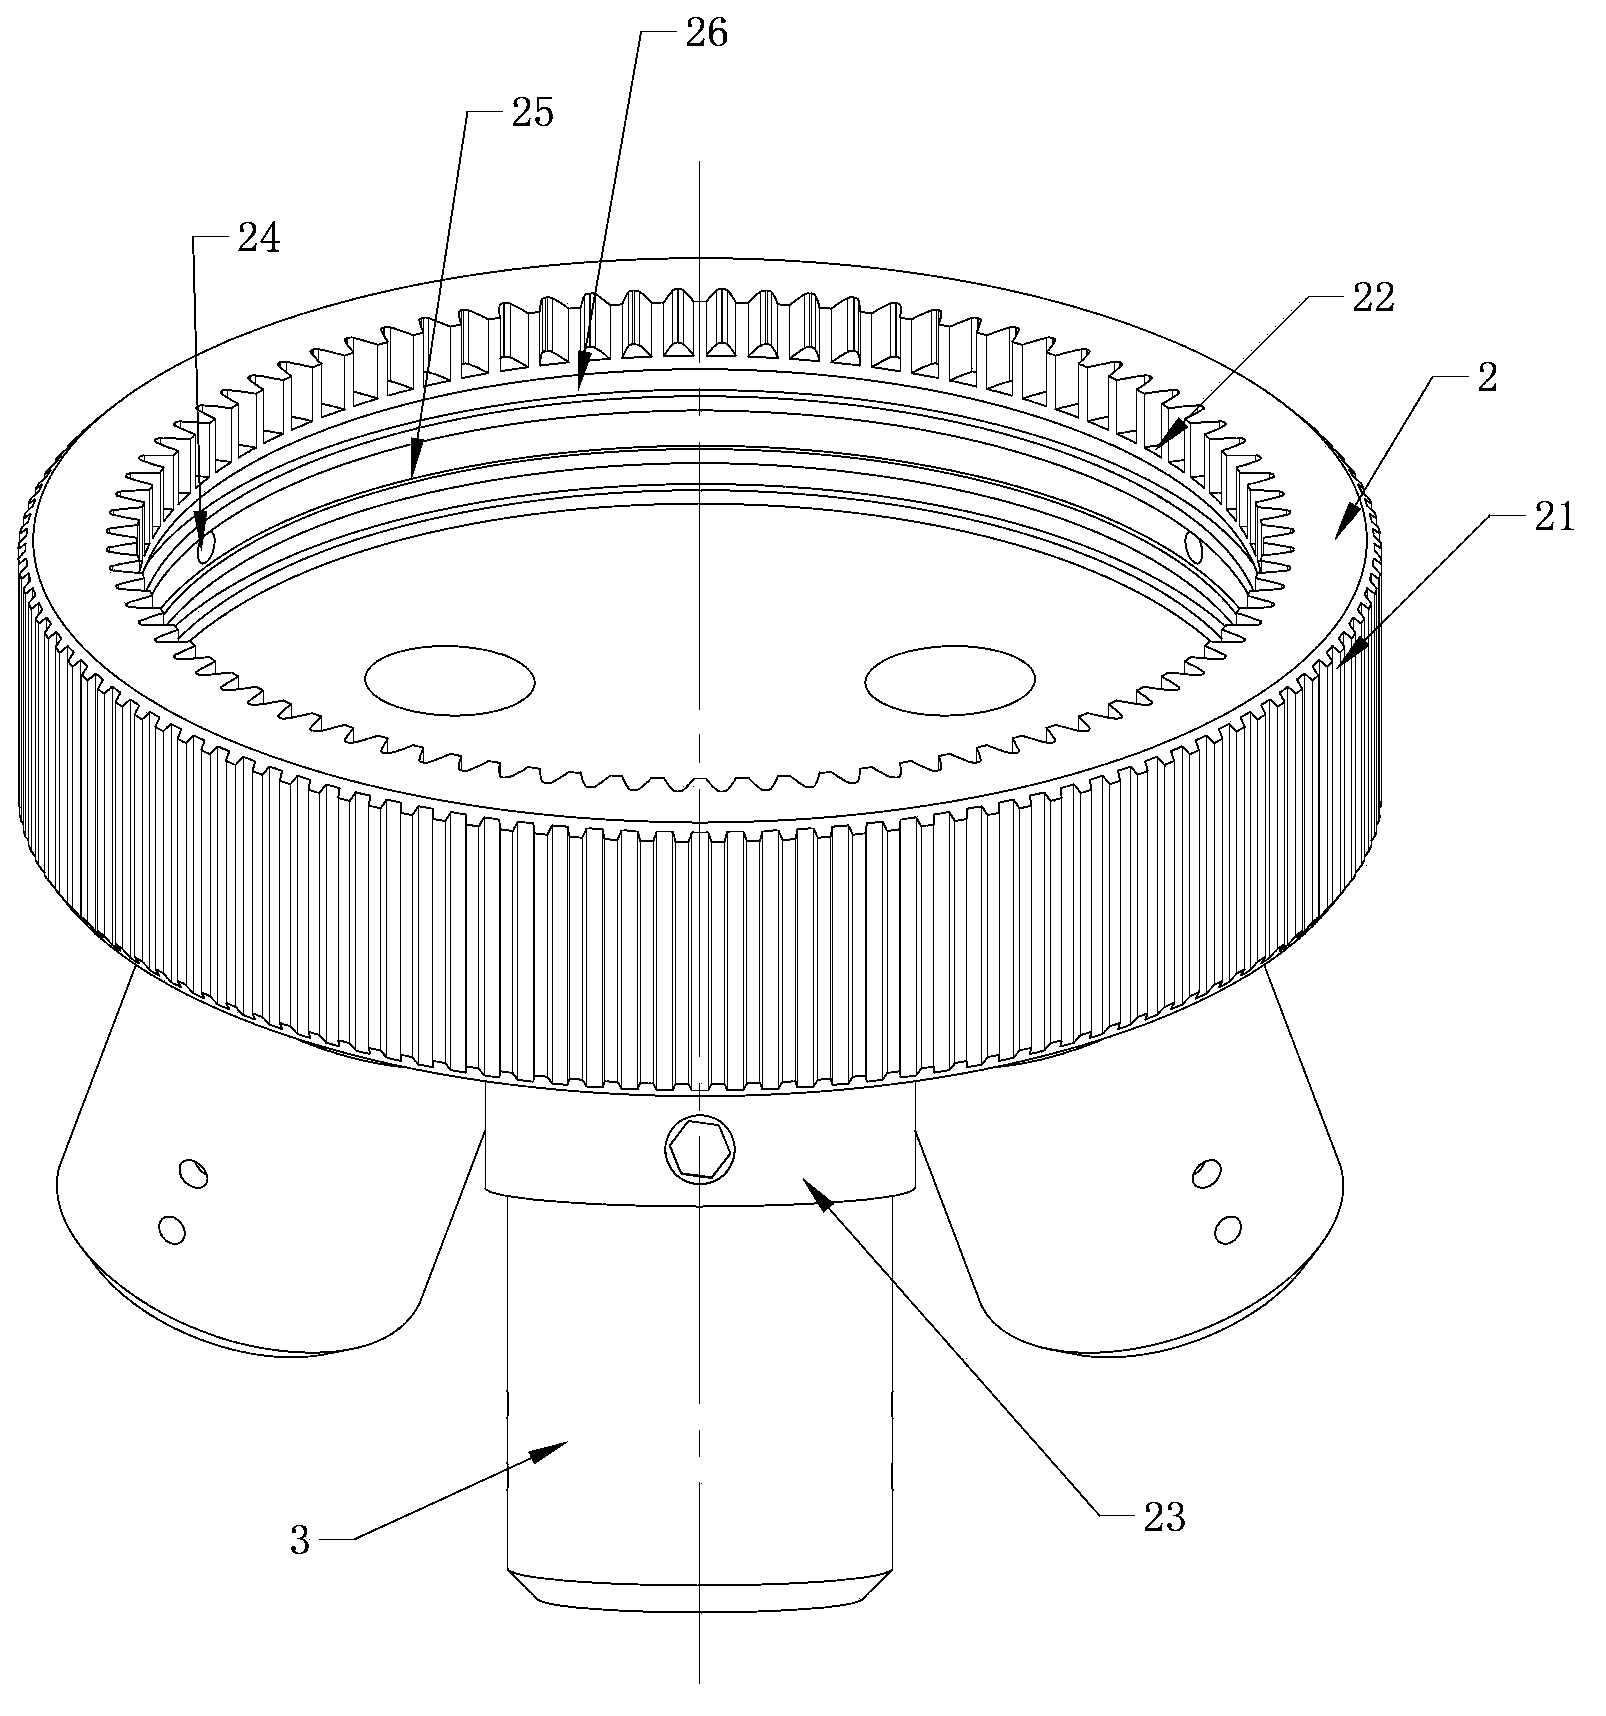 Laser 3D (three-dimensional) printing device with multiple inkjet heads